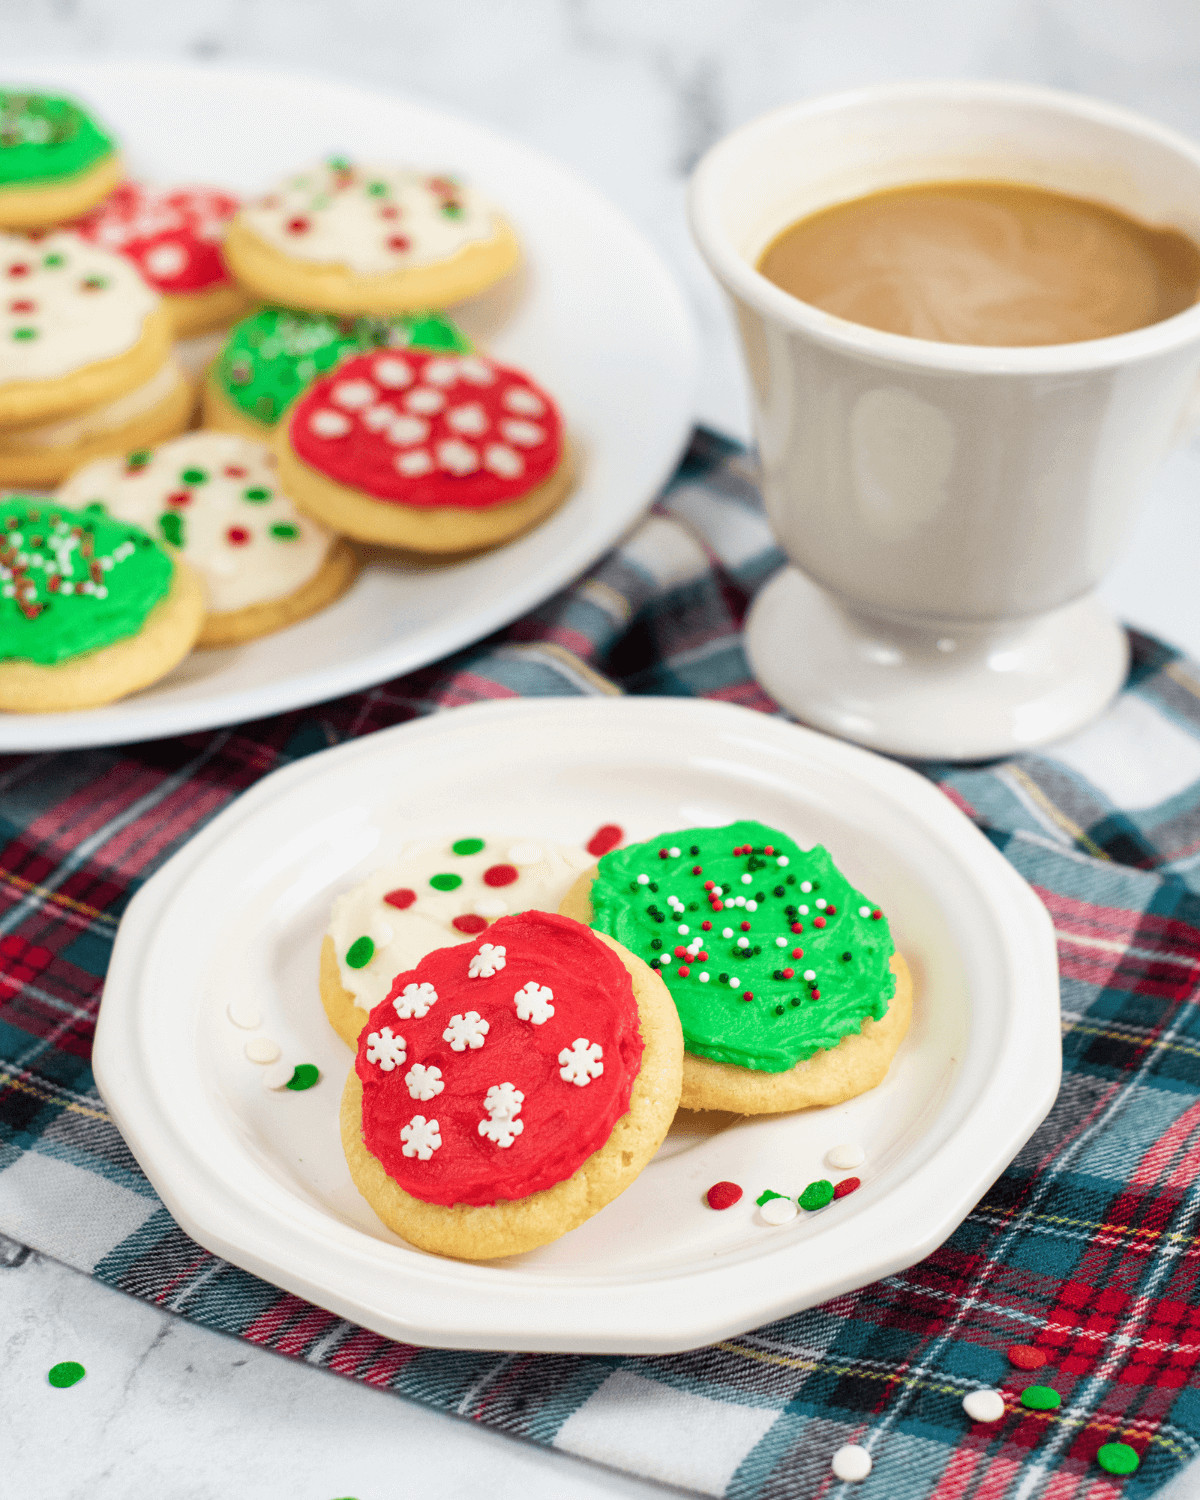 Coffee and the soft frosted sugar cookies.